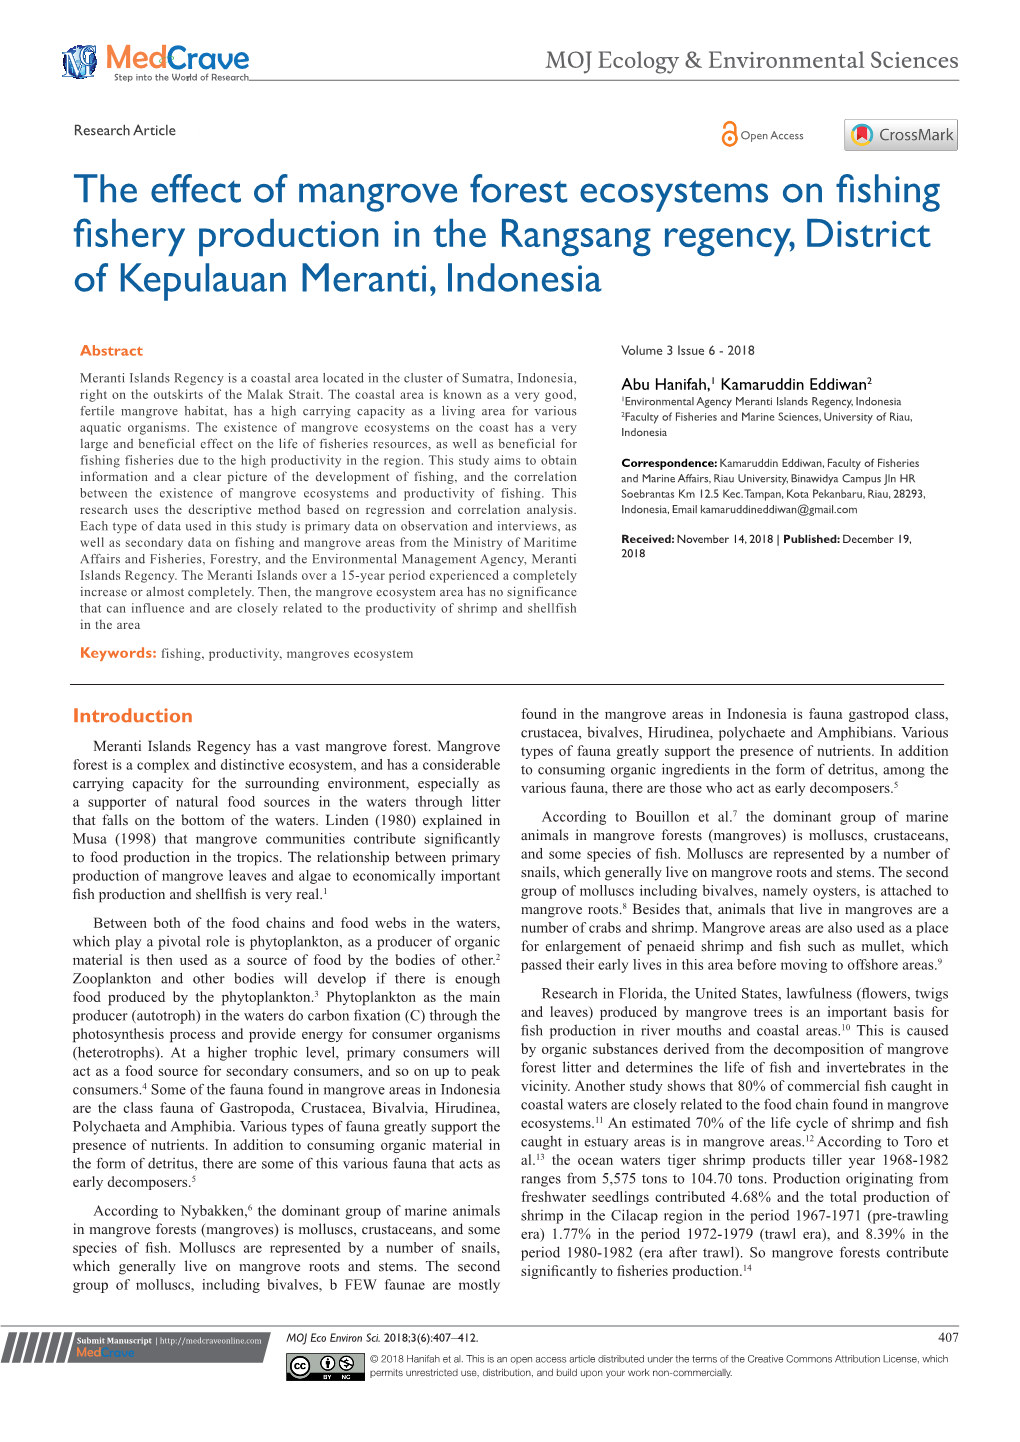 The Effect of Mangrove Forest Ecosystems on Fishing Fishery Production in the Rangsang Regency, District of Kepulauan Meranti, Indonesia